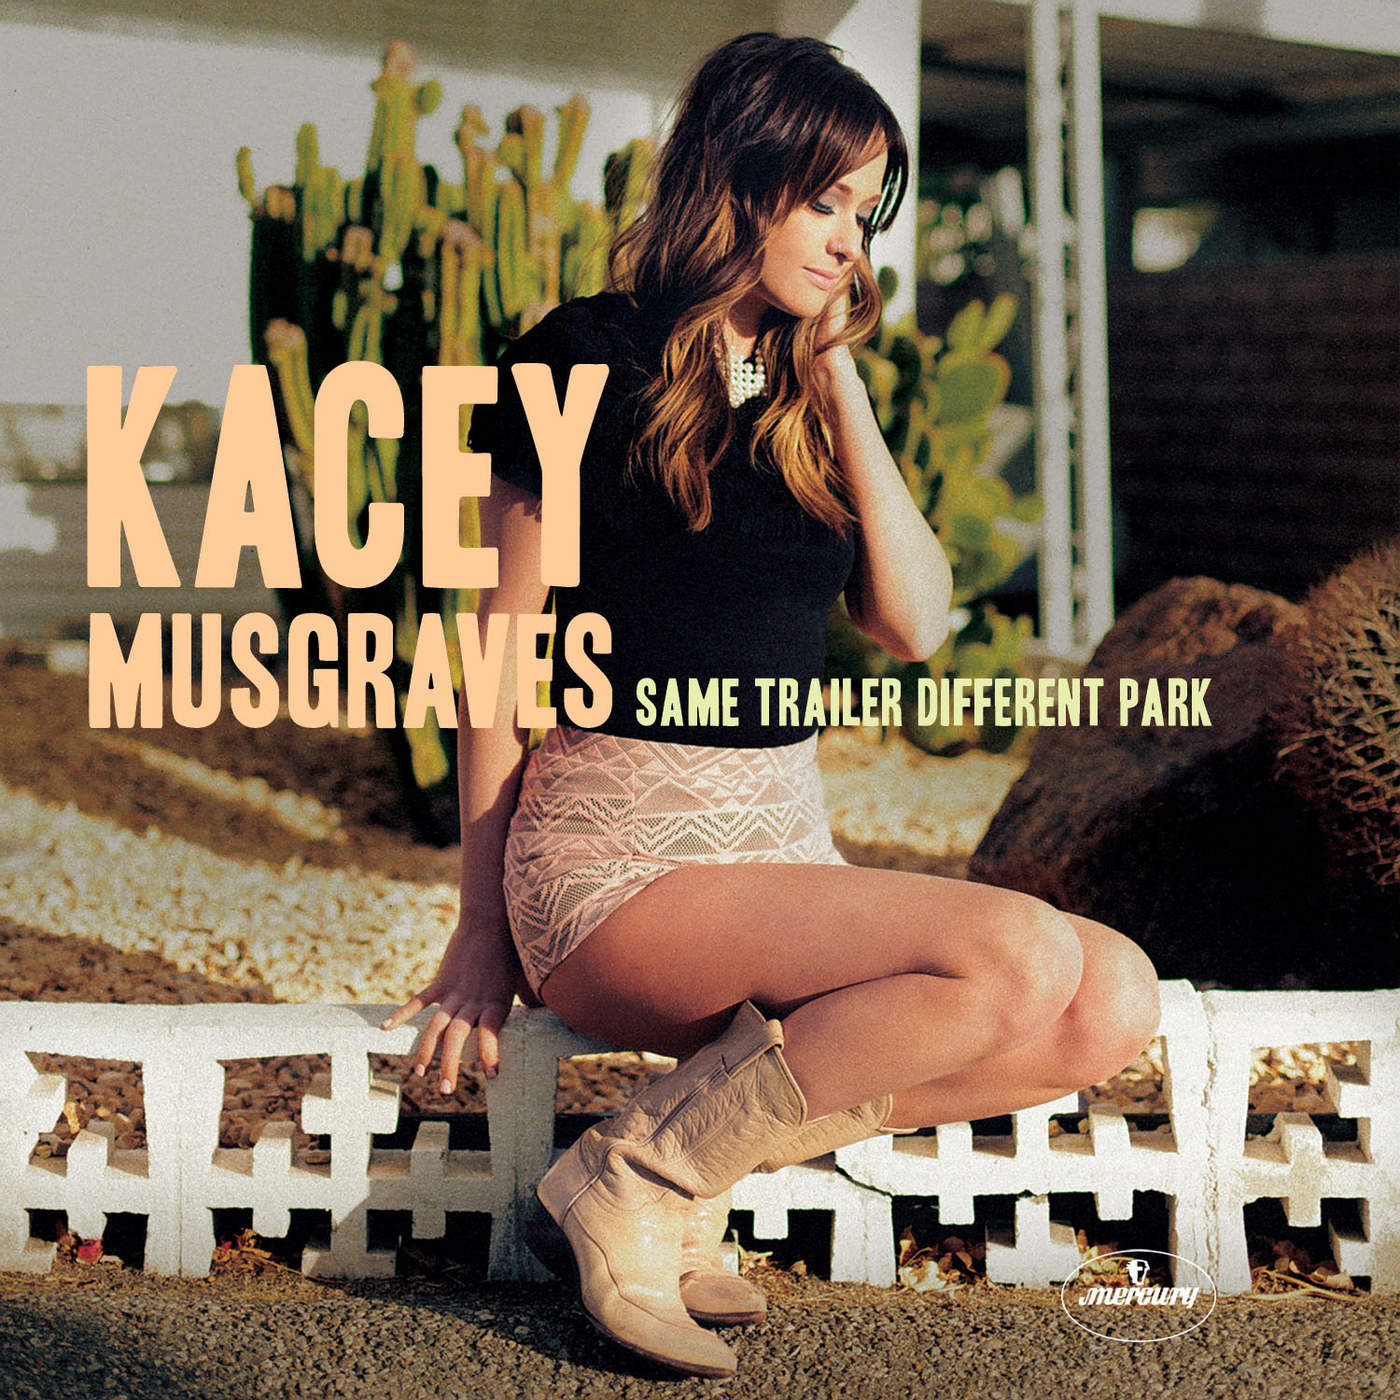 Art for Follow Your Arrow by Kacey Musgraves